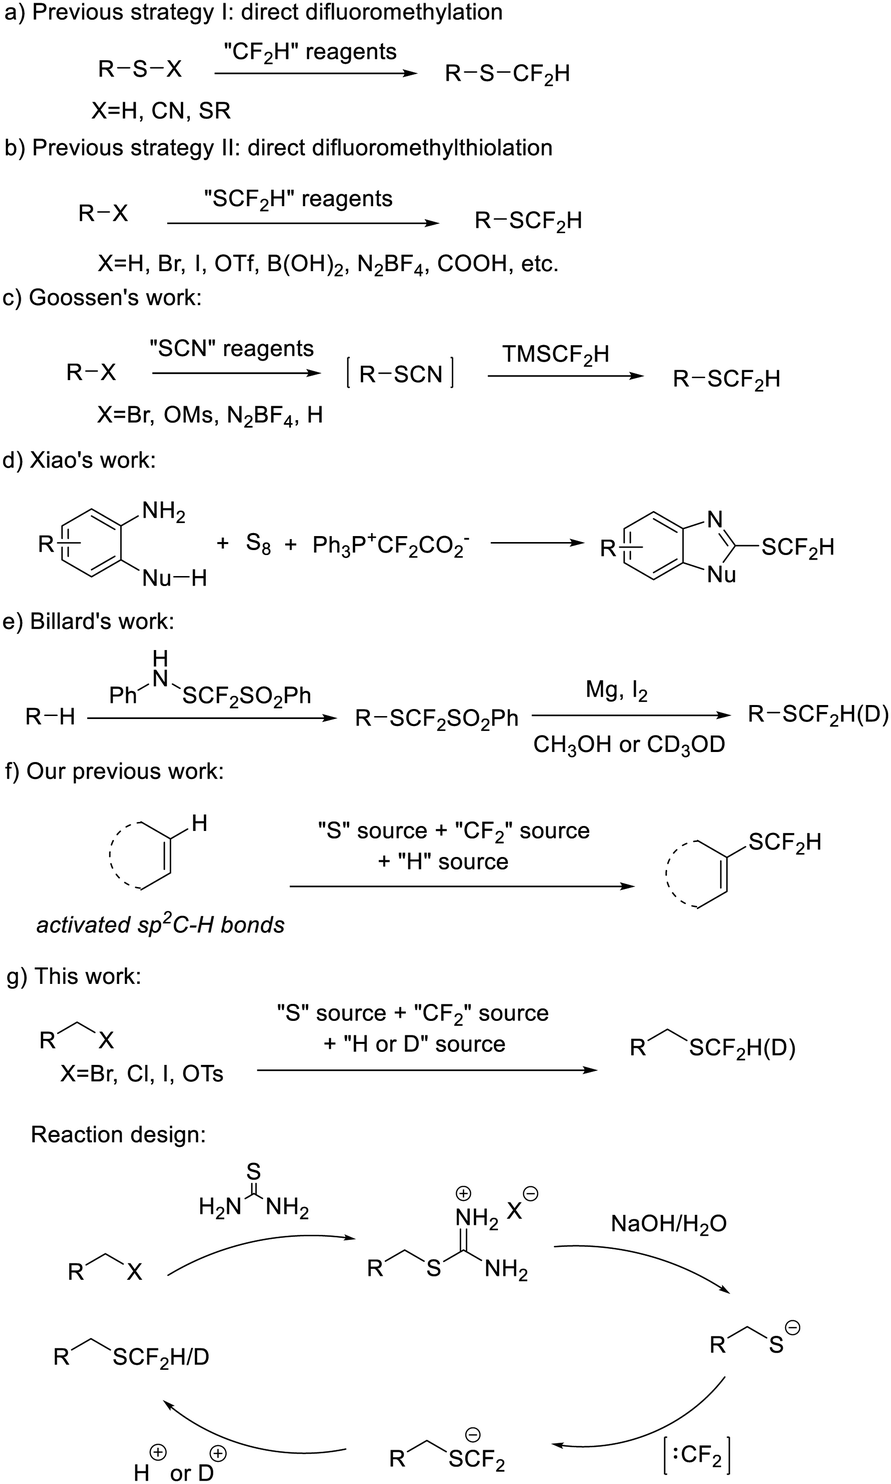 Synthesis Of Difluoromethyl And Deuterium Labeled Difluoromethyl Thioethers From Aliphatic Electrophiles Chemical Communications Rsc Publishing Doi 10 1039 C9cck